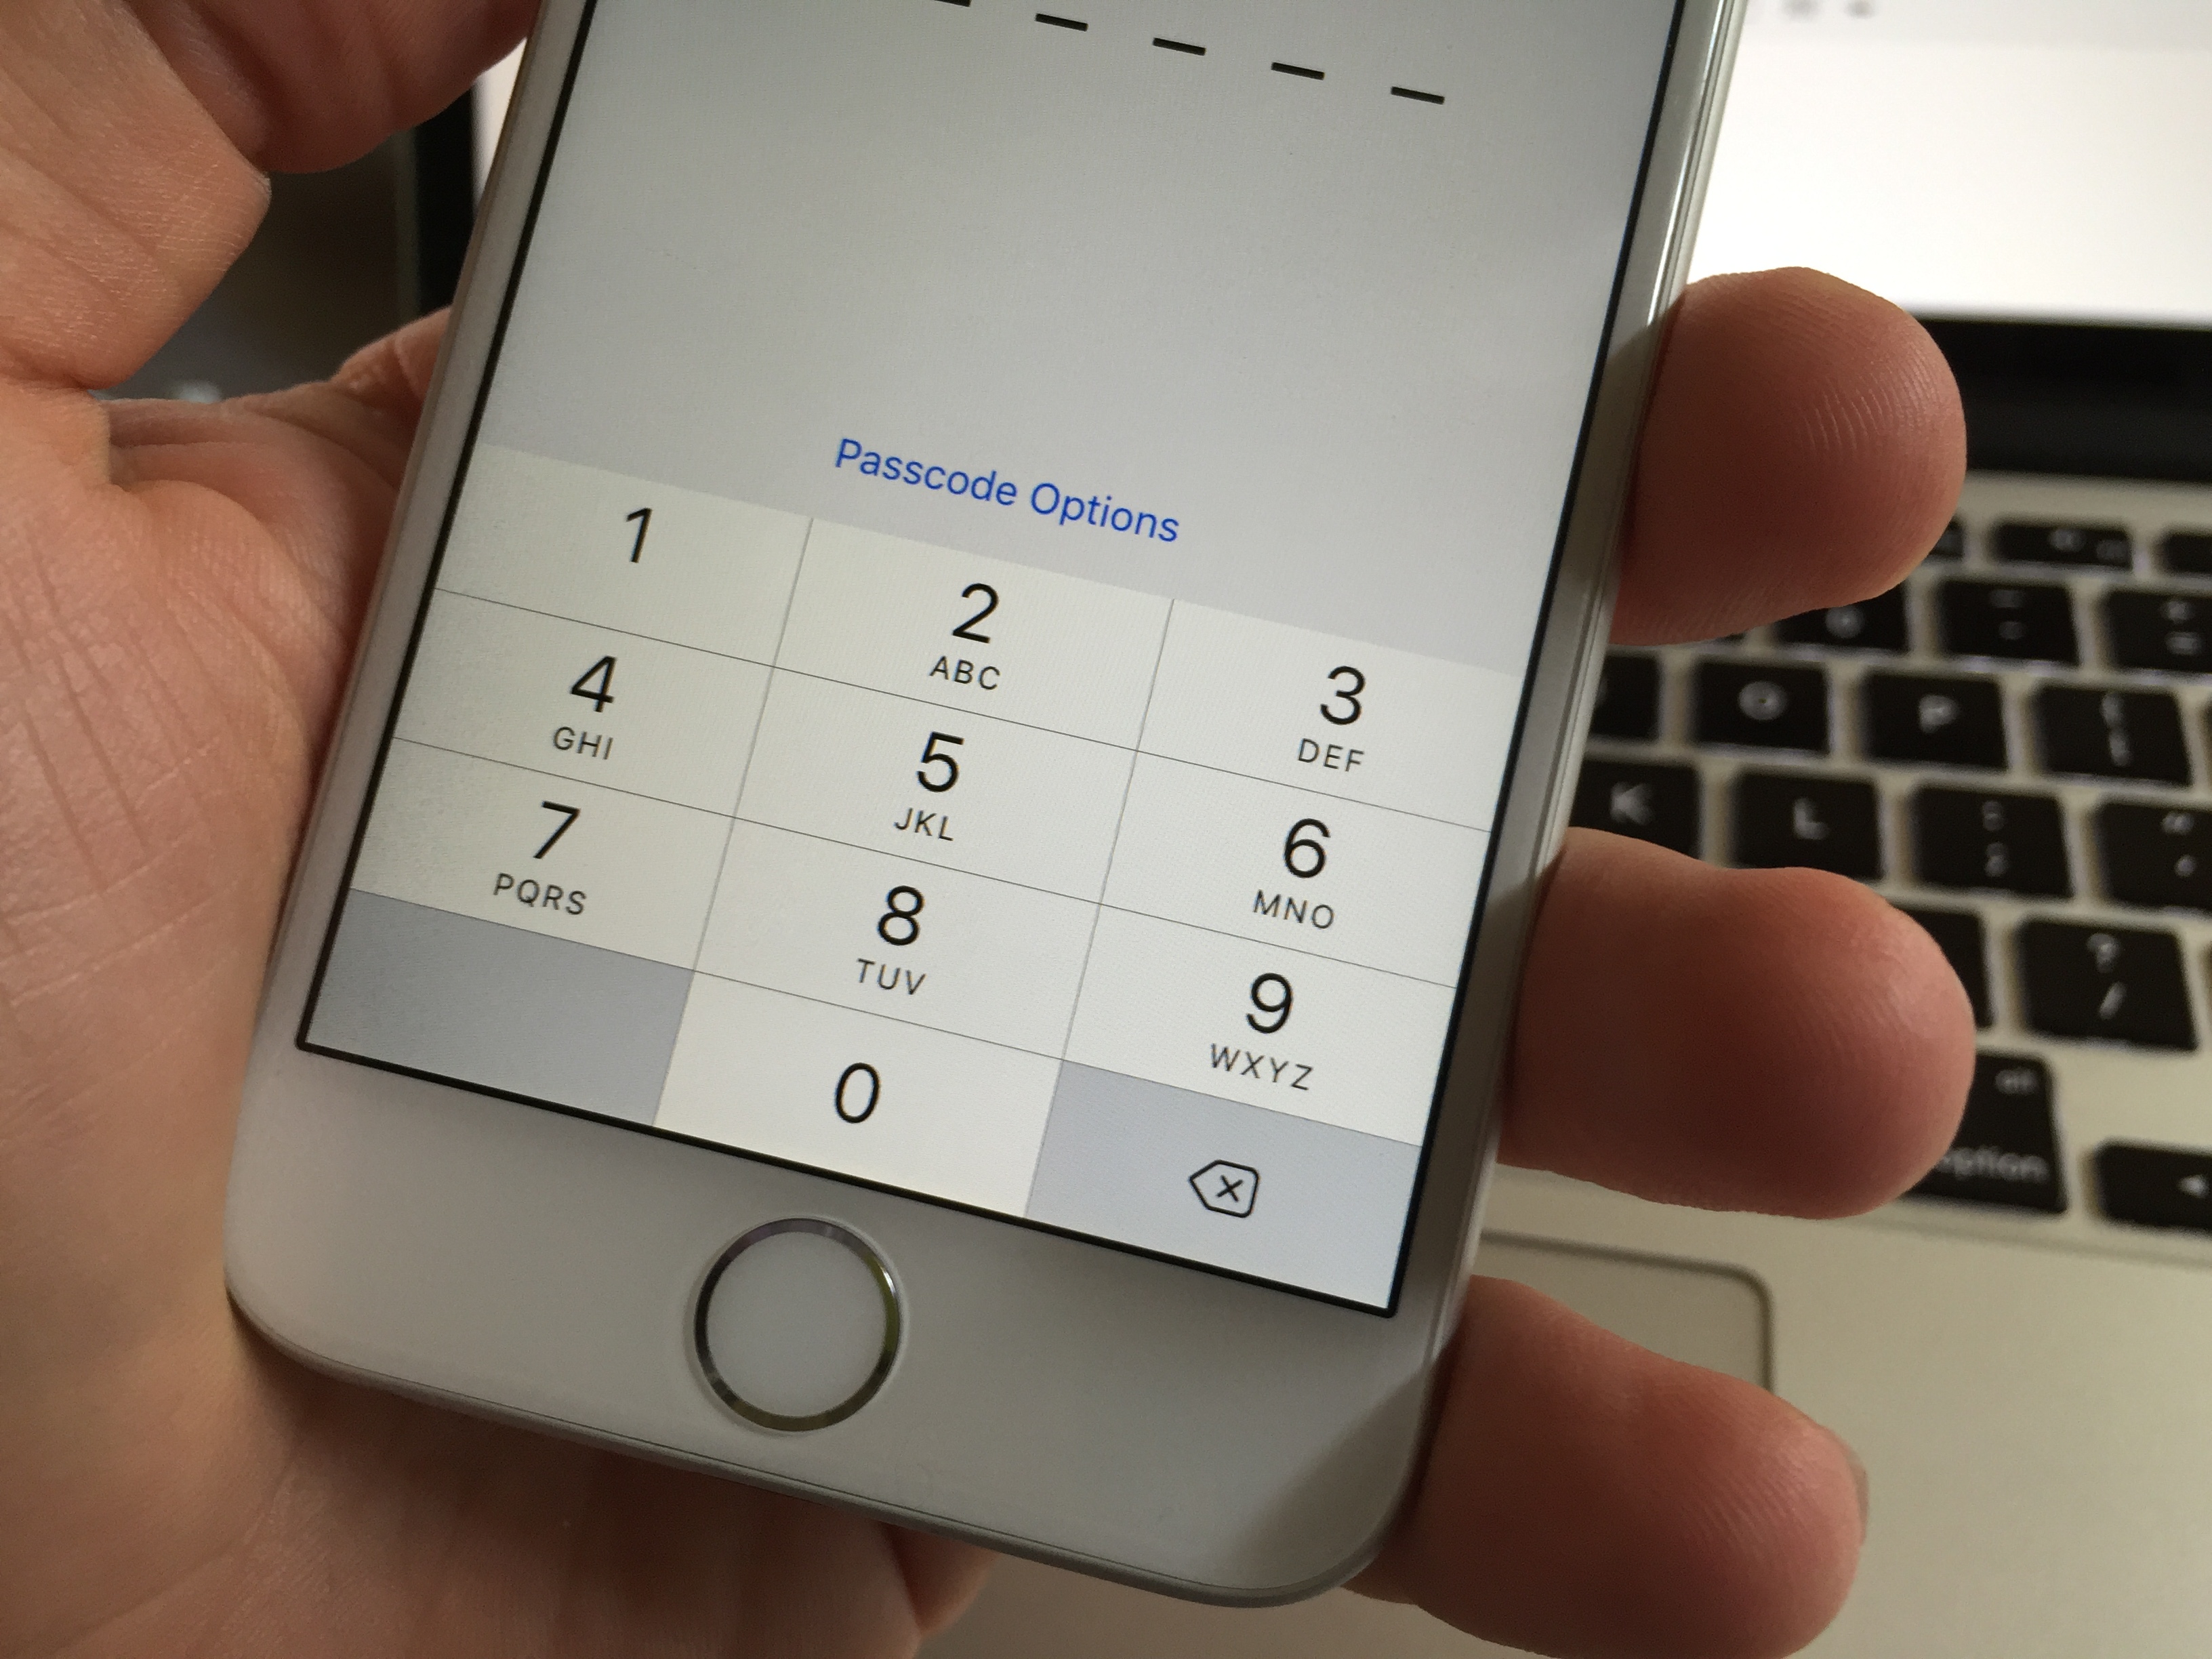 How to set a 4-digit passcode on iOS 9 or the iPhone 6s instead of using six digits.